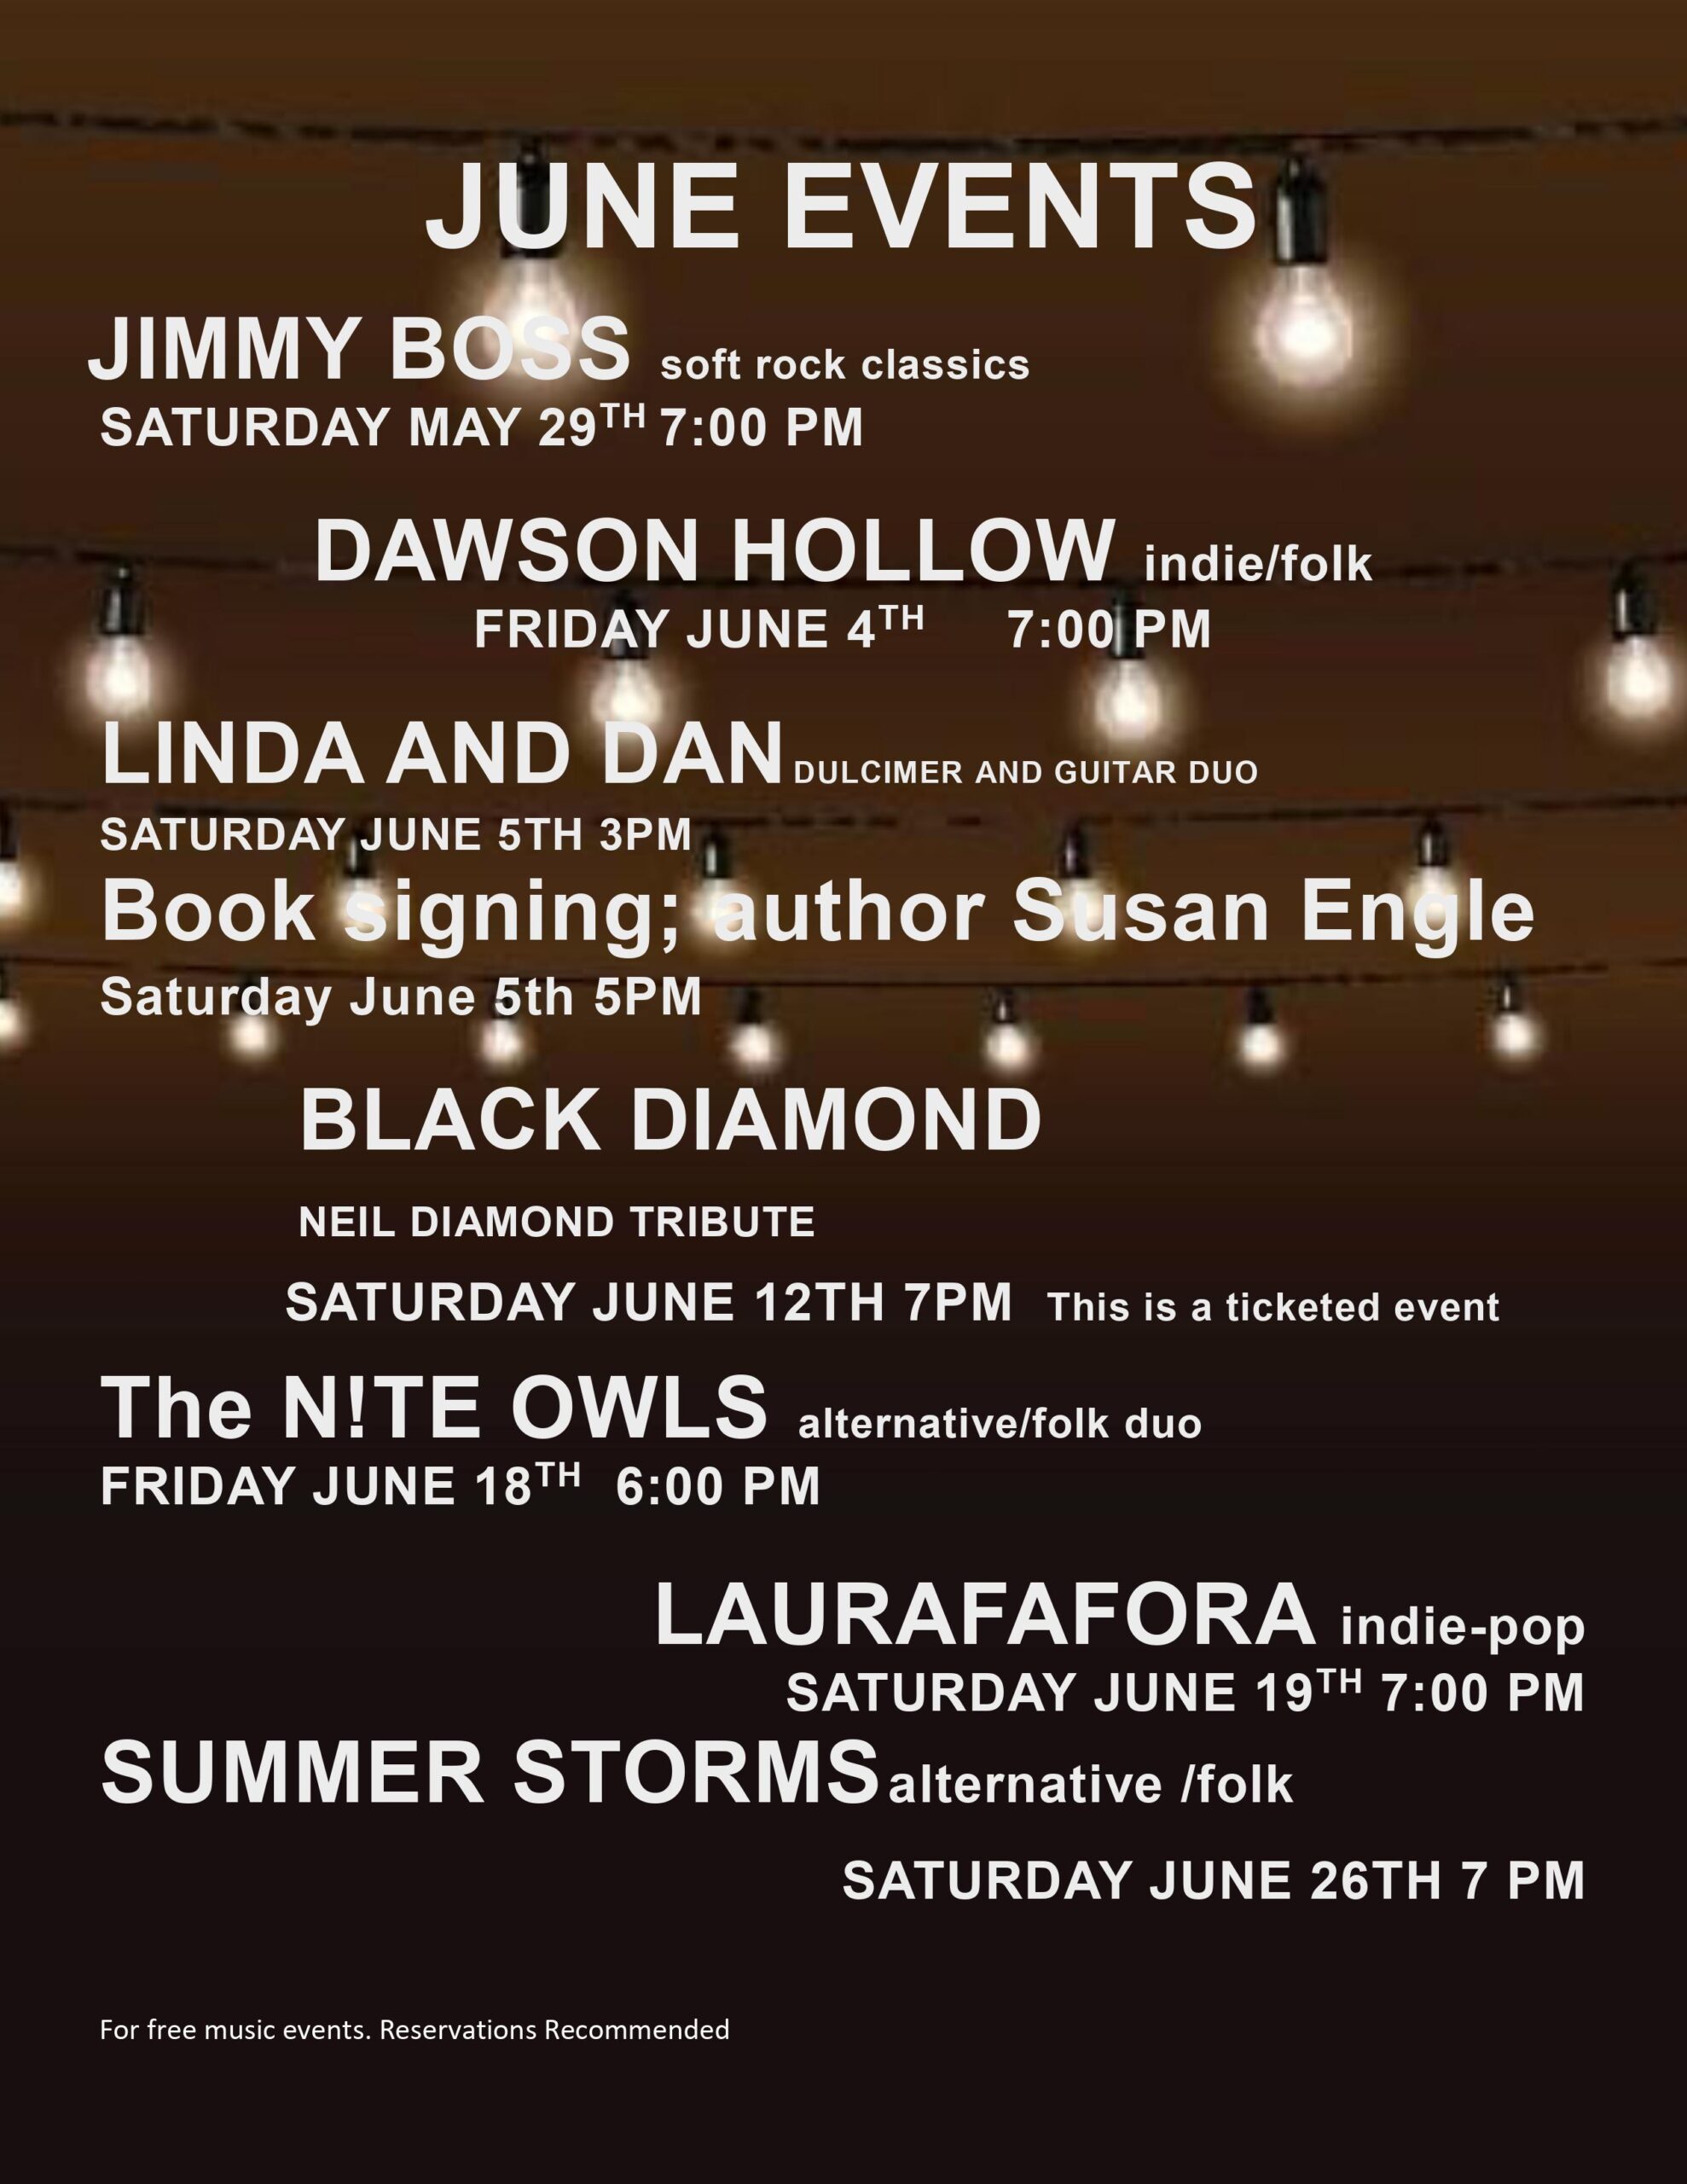 June Events